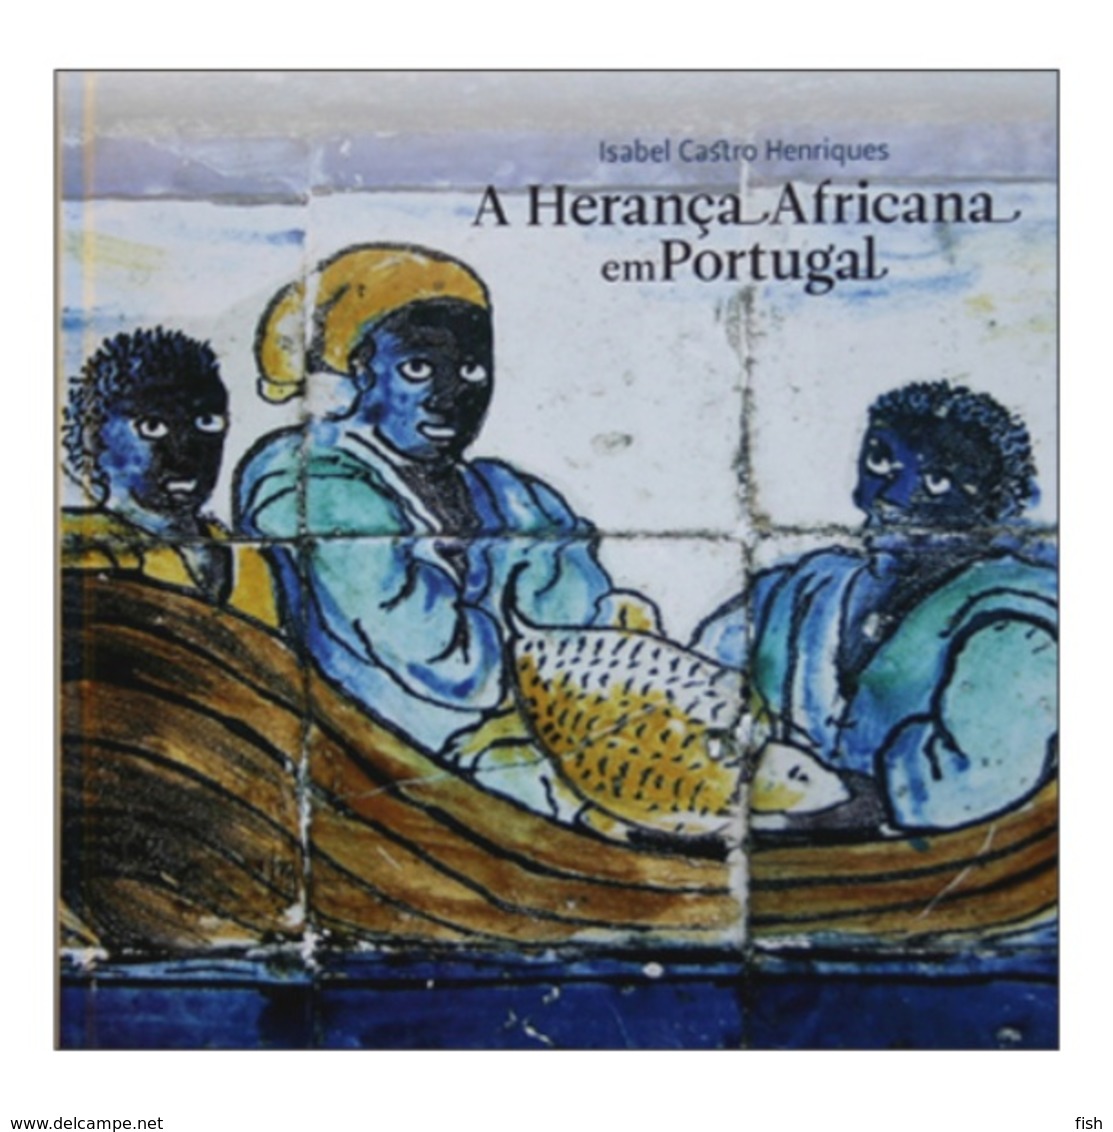 Portugal ** & CTT, Thematic Book With Stamps, African Heritage In Portugal 2009 (20190) - Buch Des Jahres